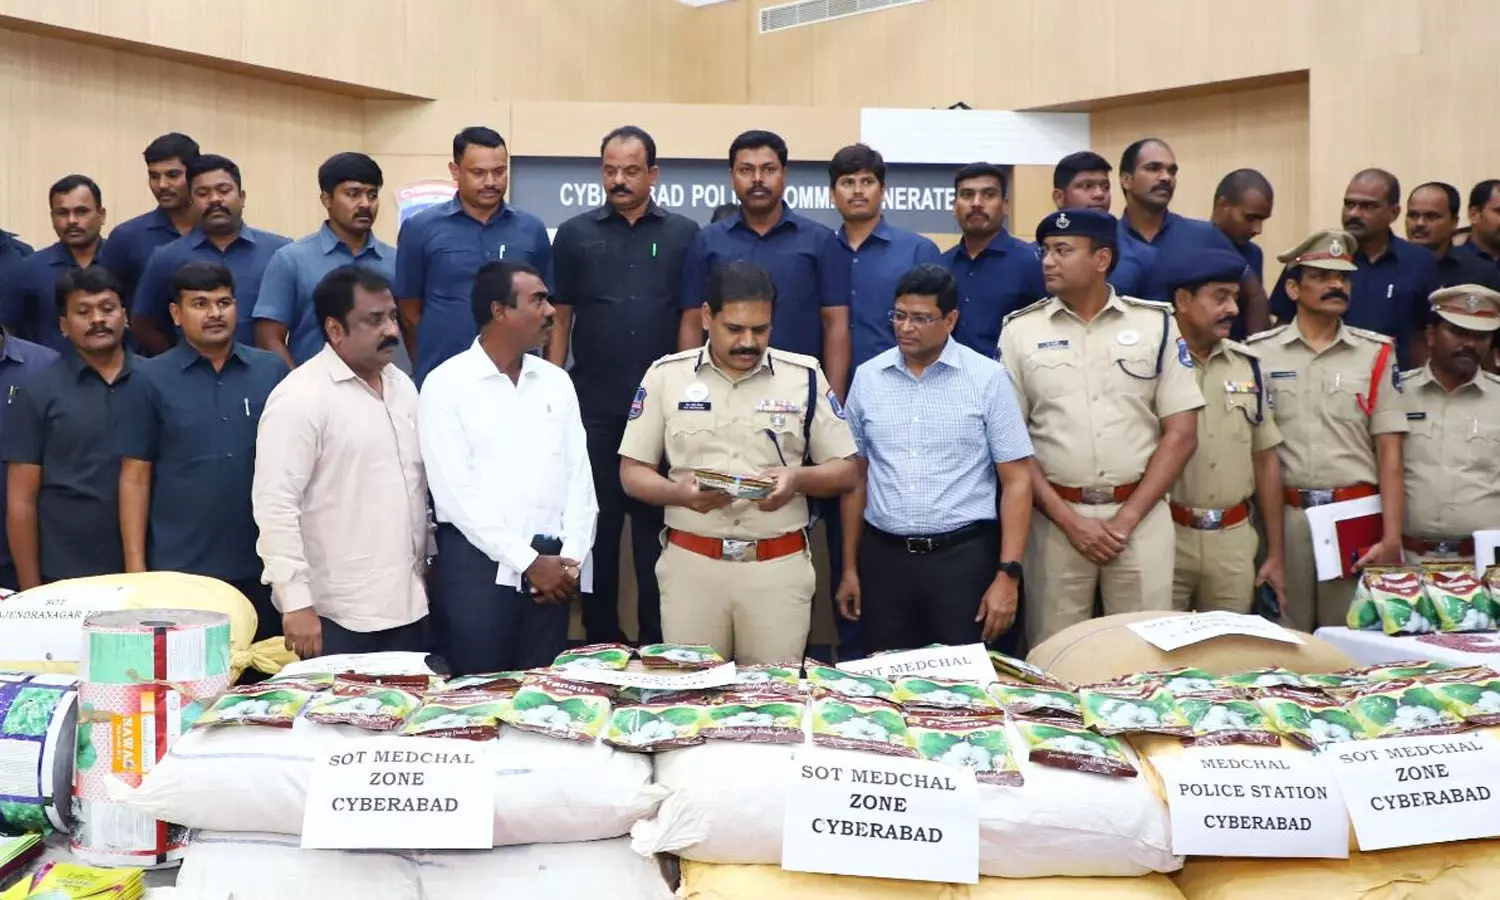 Cyberabad police bust spurious cotton seed selling racket, arrest 10